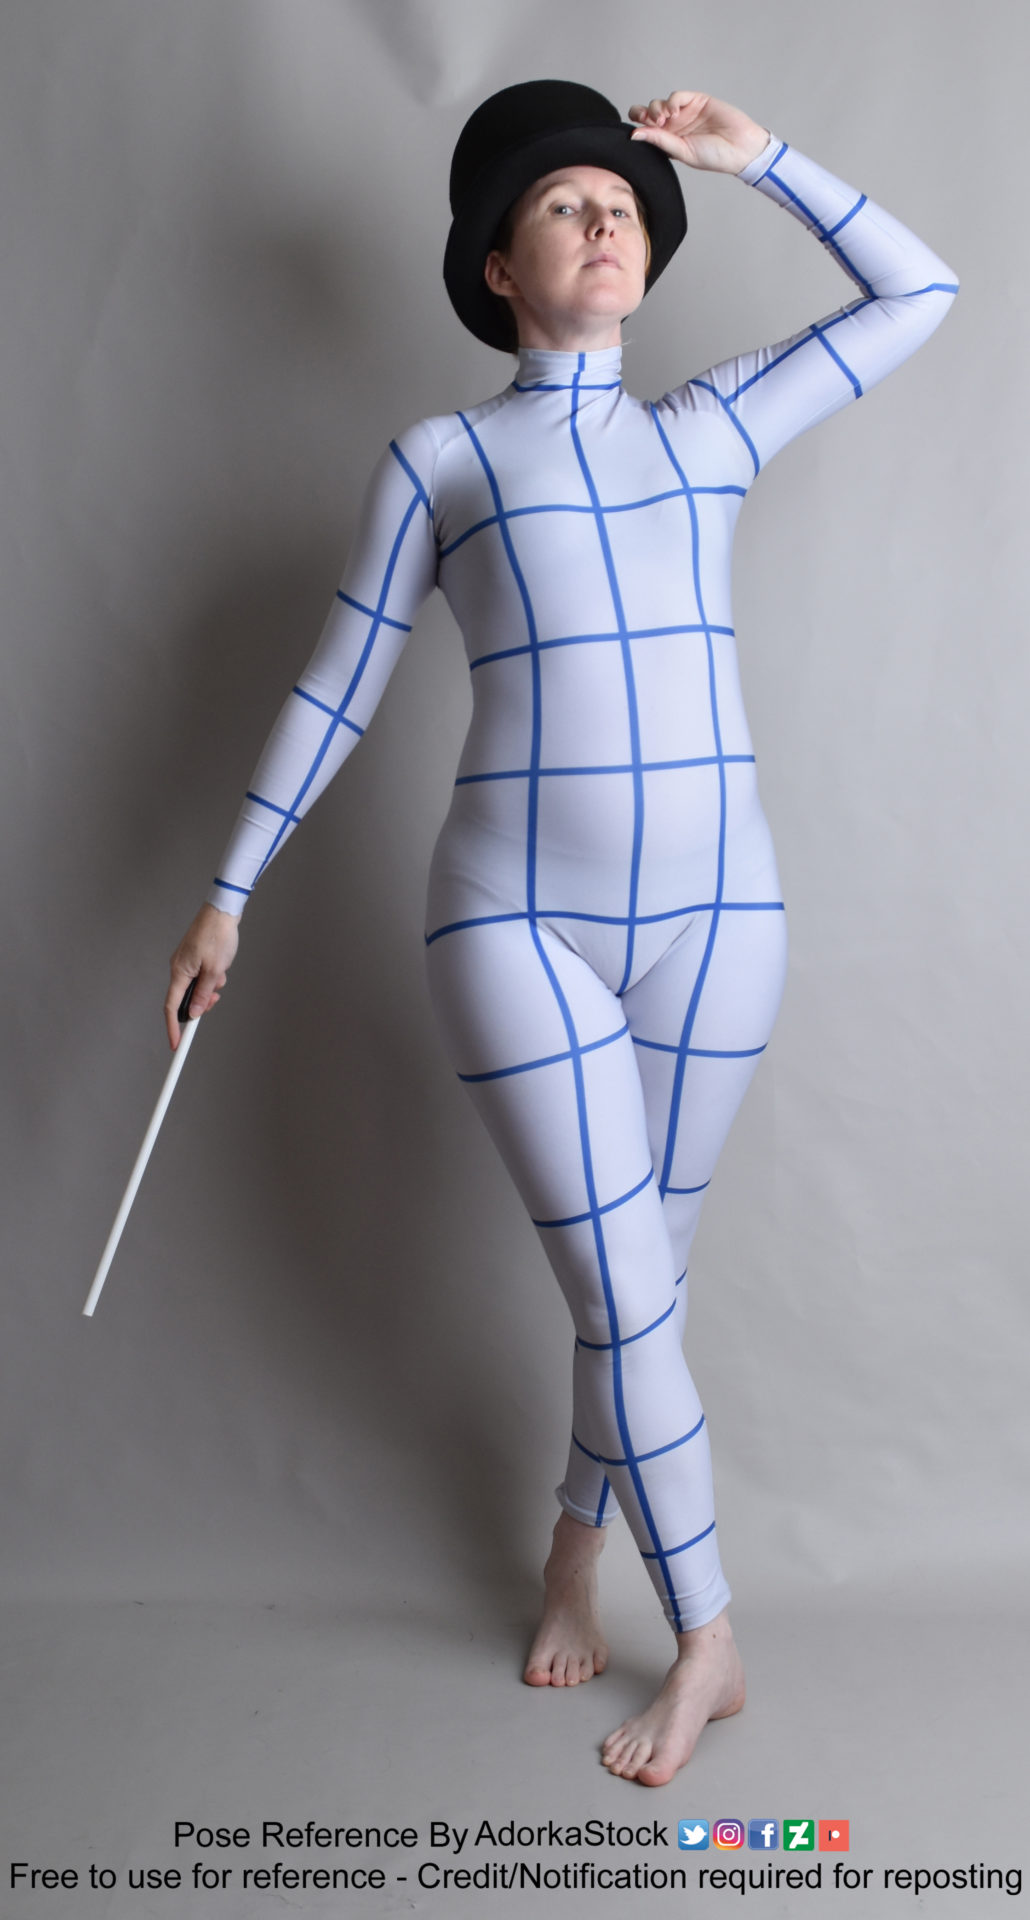 pose reference of a figure in a grid suit with a top hat and wand, one leg crossed in front taking a step with one hand tipping the hat up